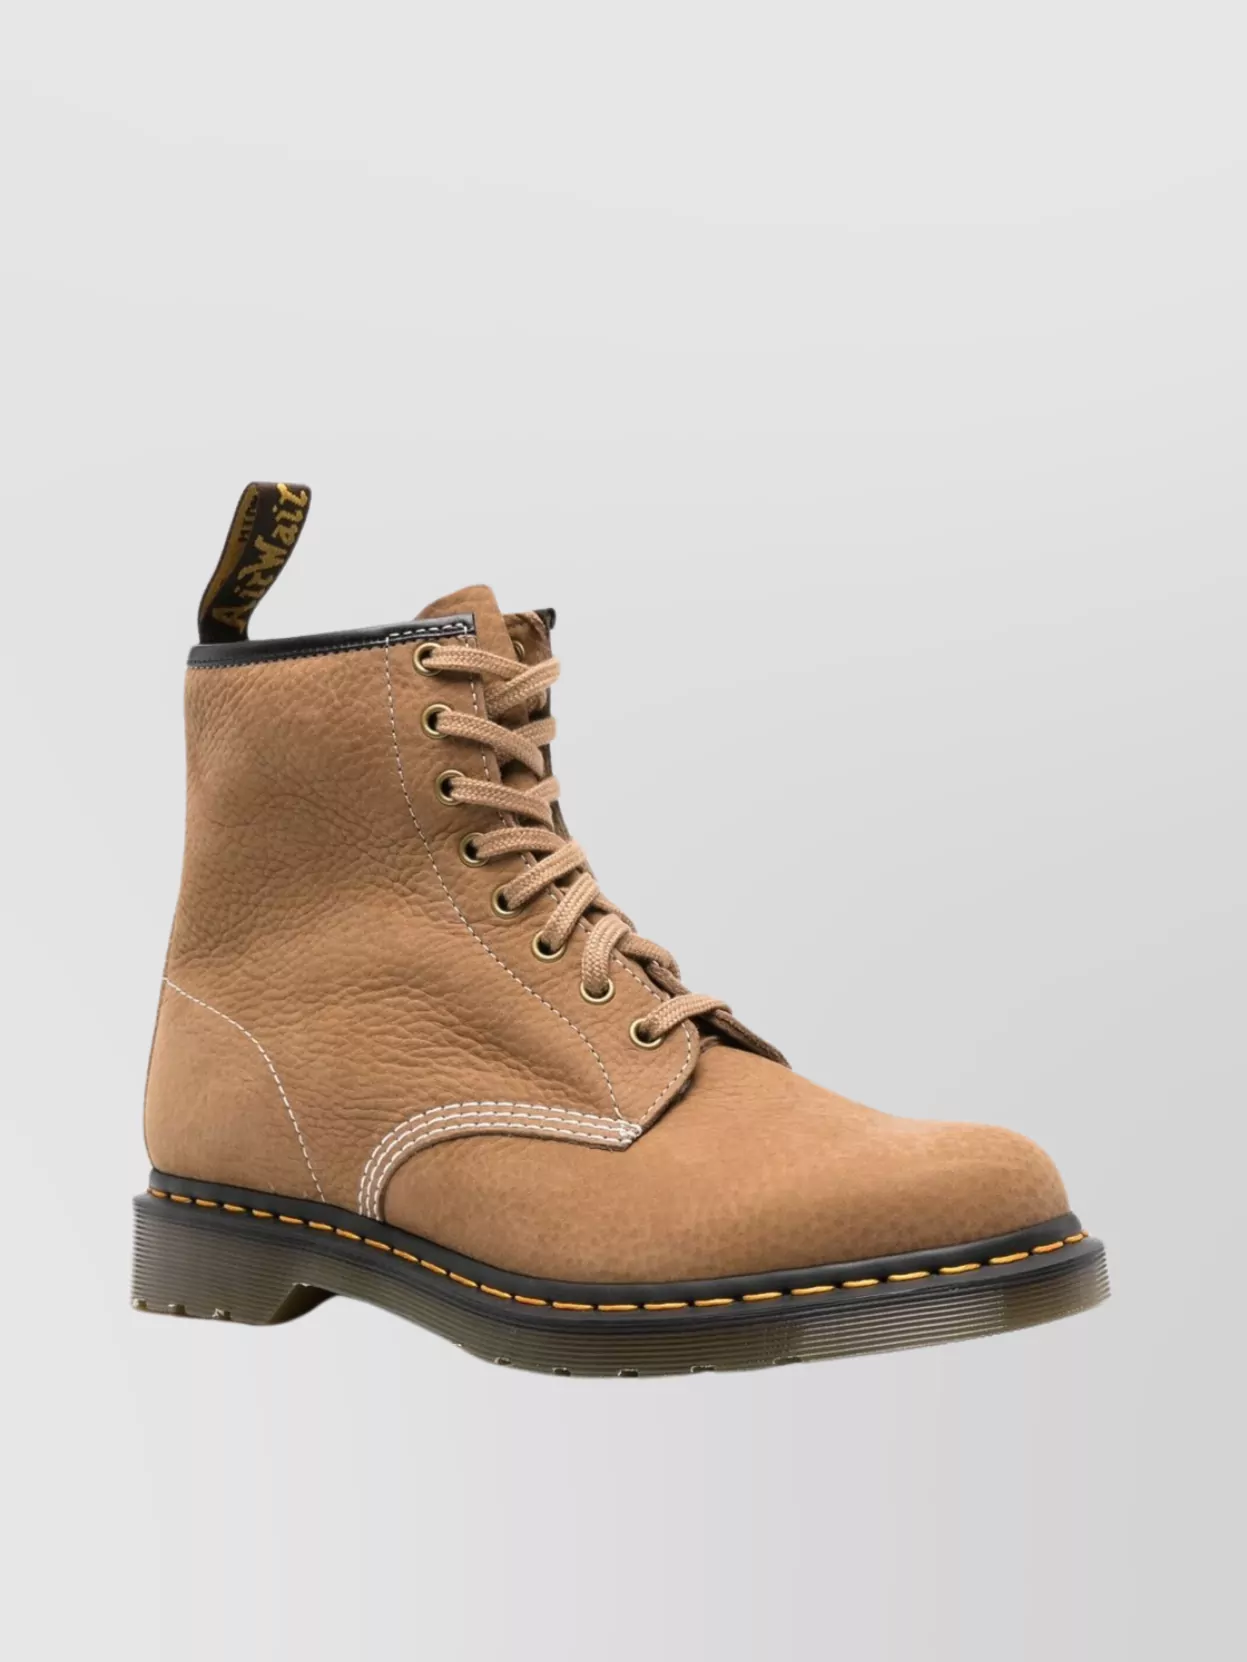 Dr. Martens' Stitched Boots With Suede Backstrap And Airwair Loop In Brown